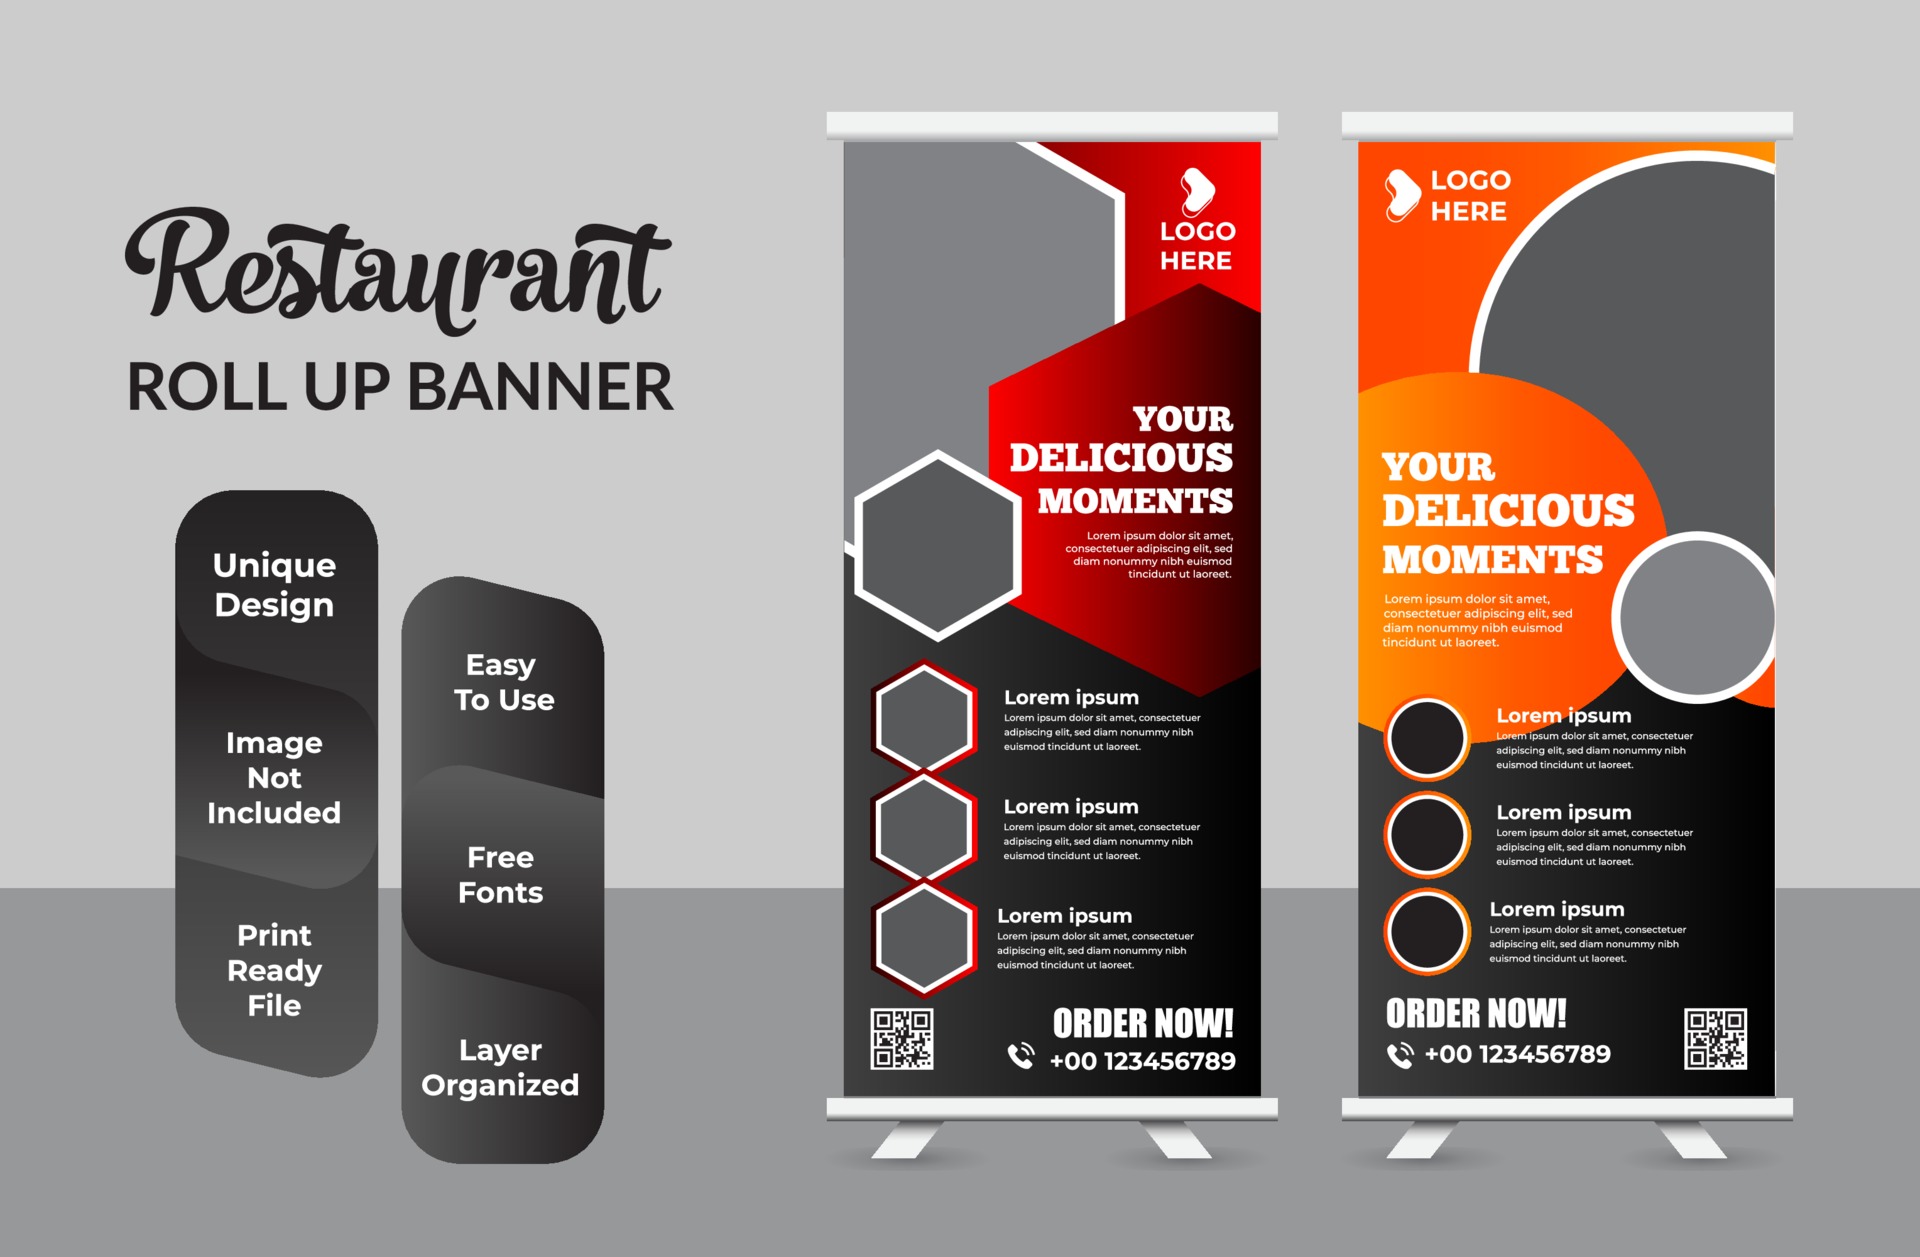 Garanti At blokere Seneste nyt Printing Banner Vector Art, Icons, and Graphics for Free Download